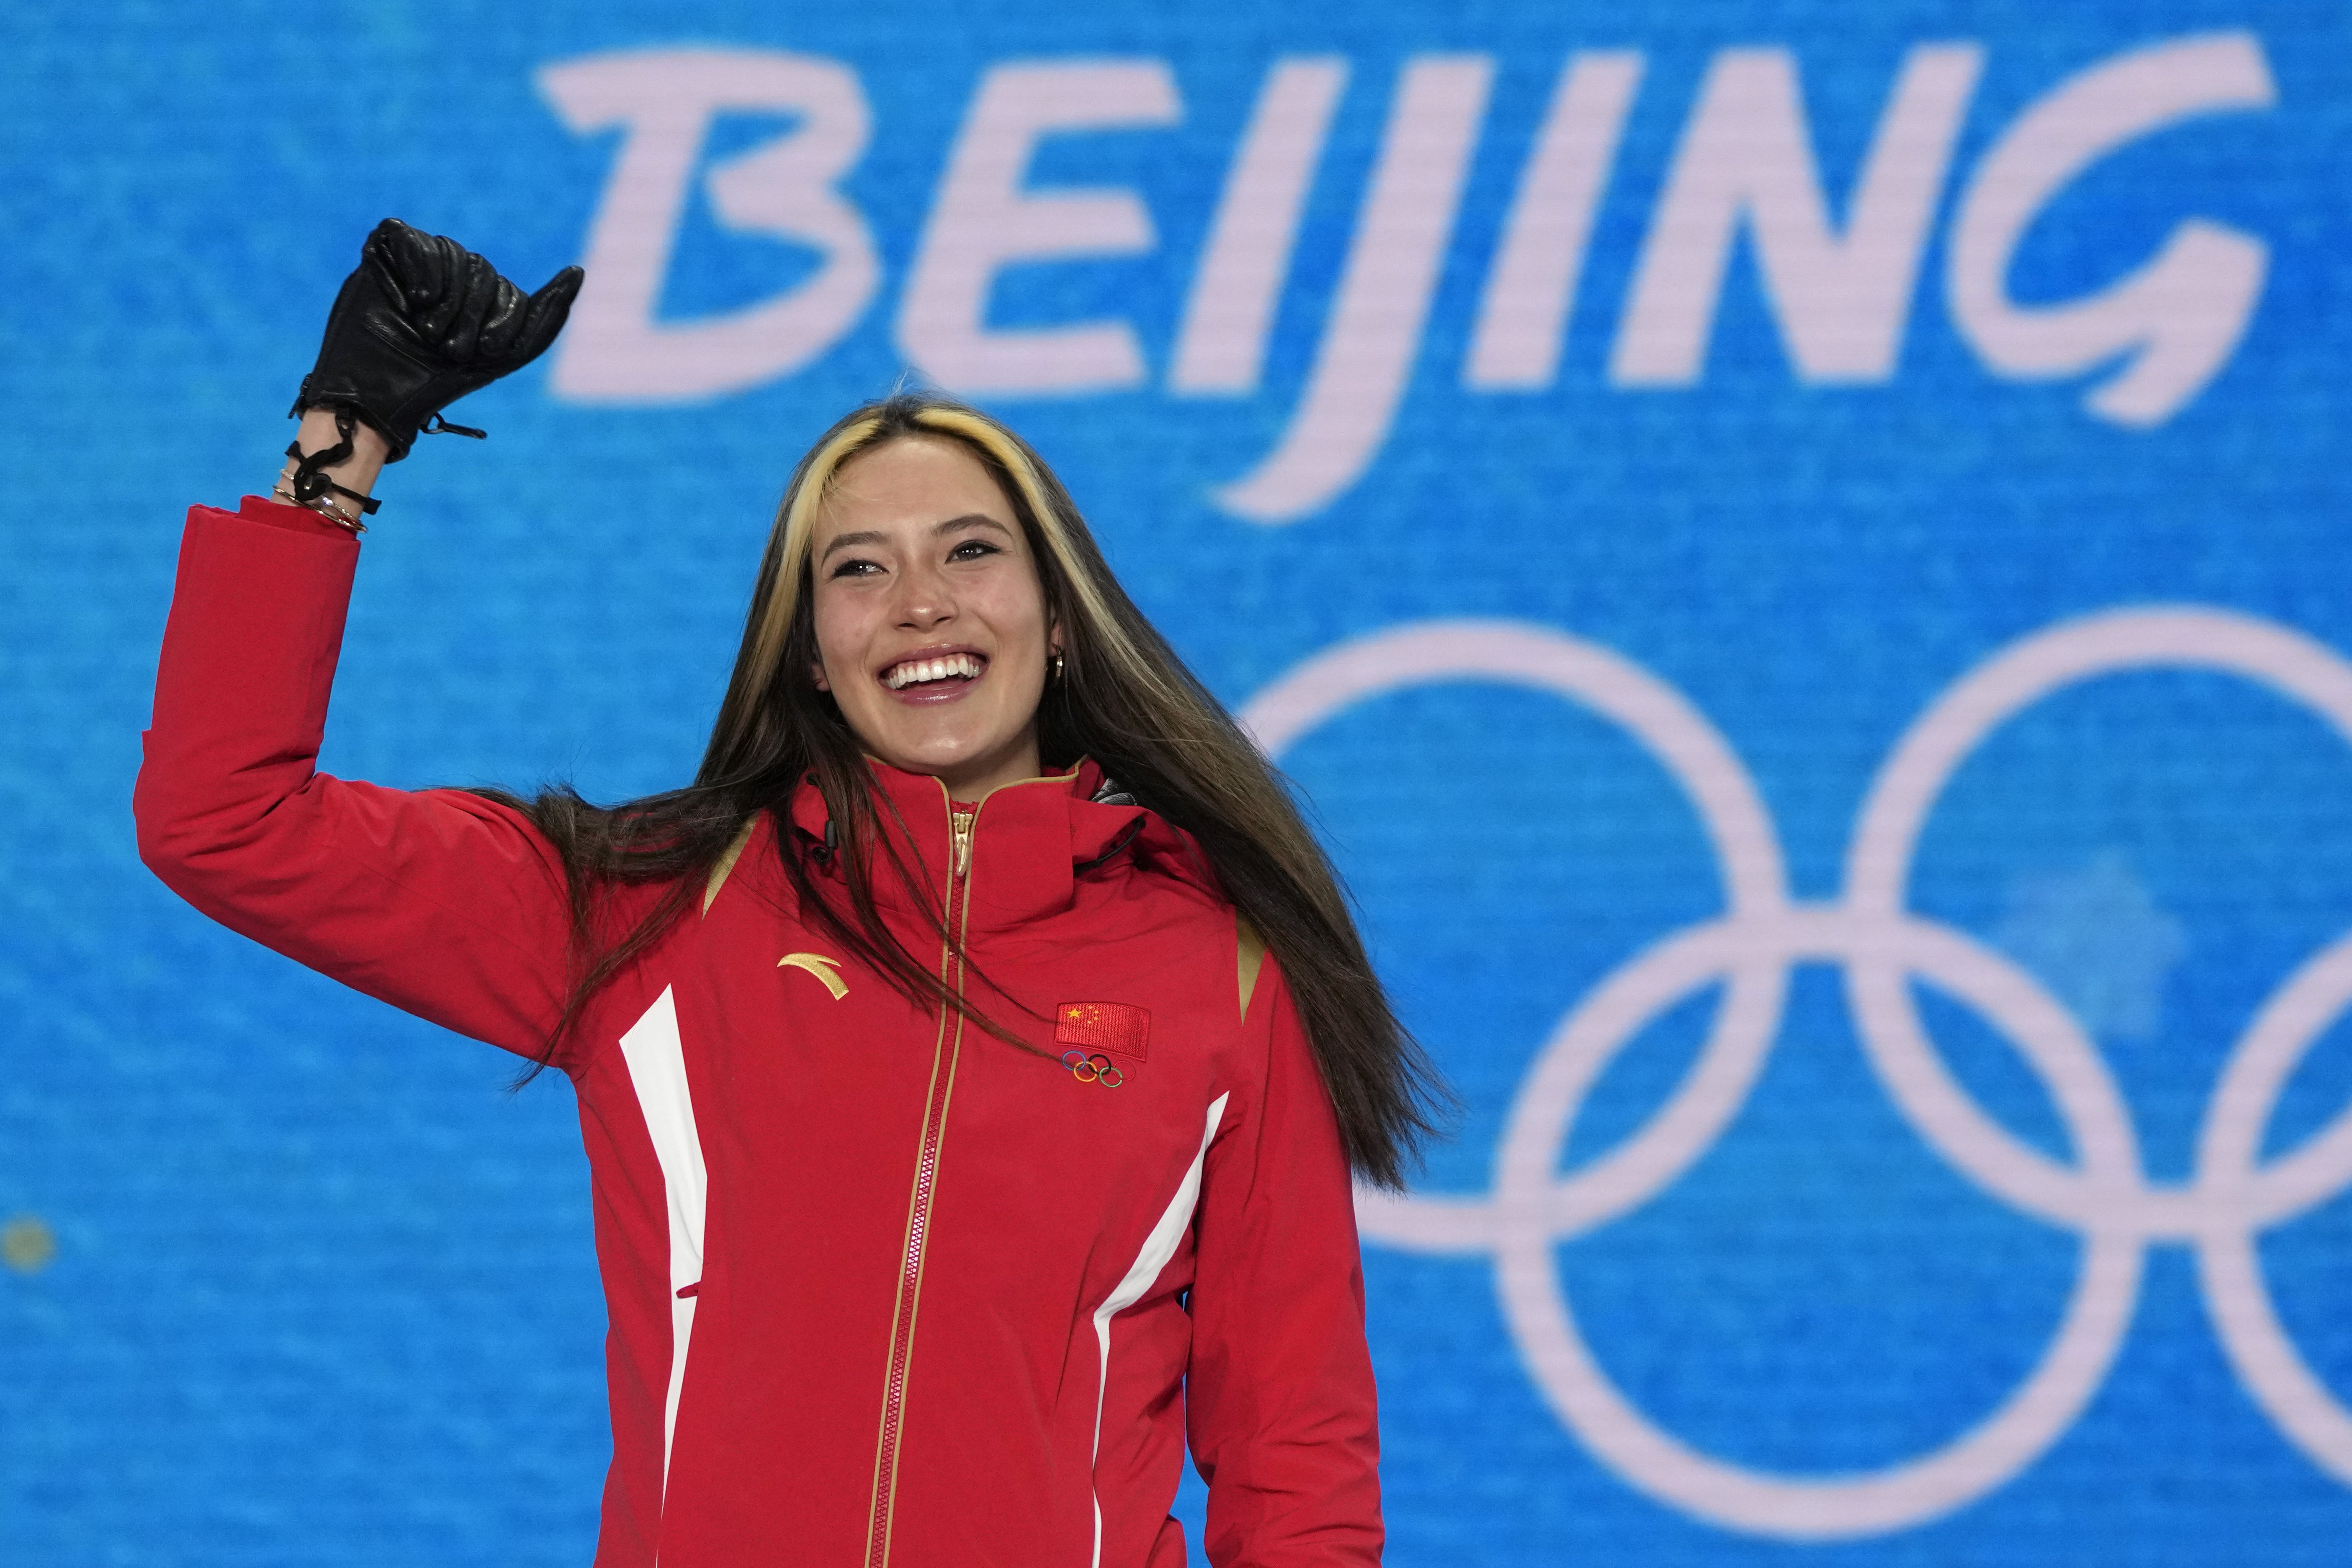 Born And Raised In America, Ski Athlete Eileen Gu Flooded With